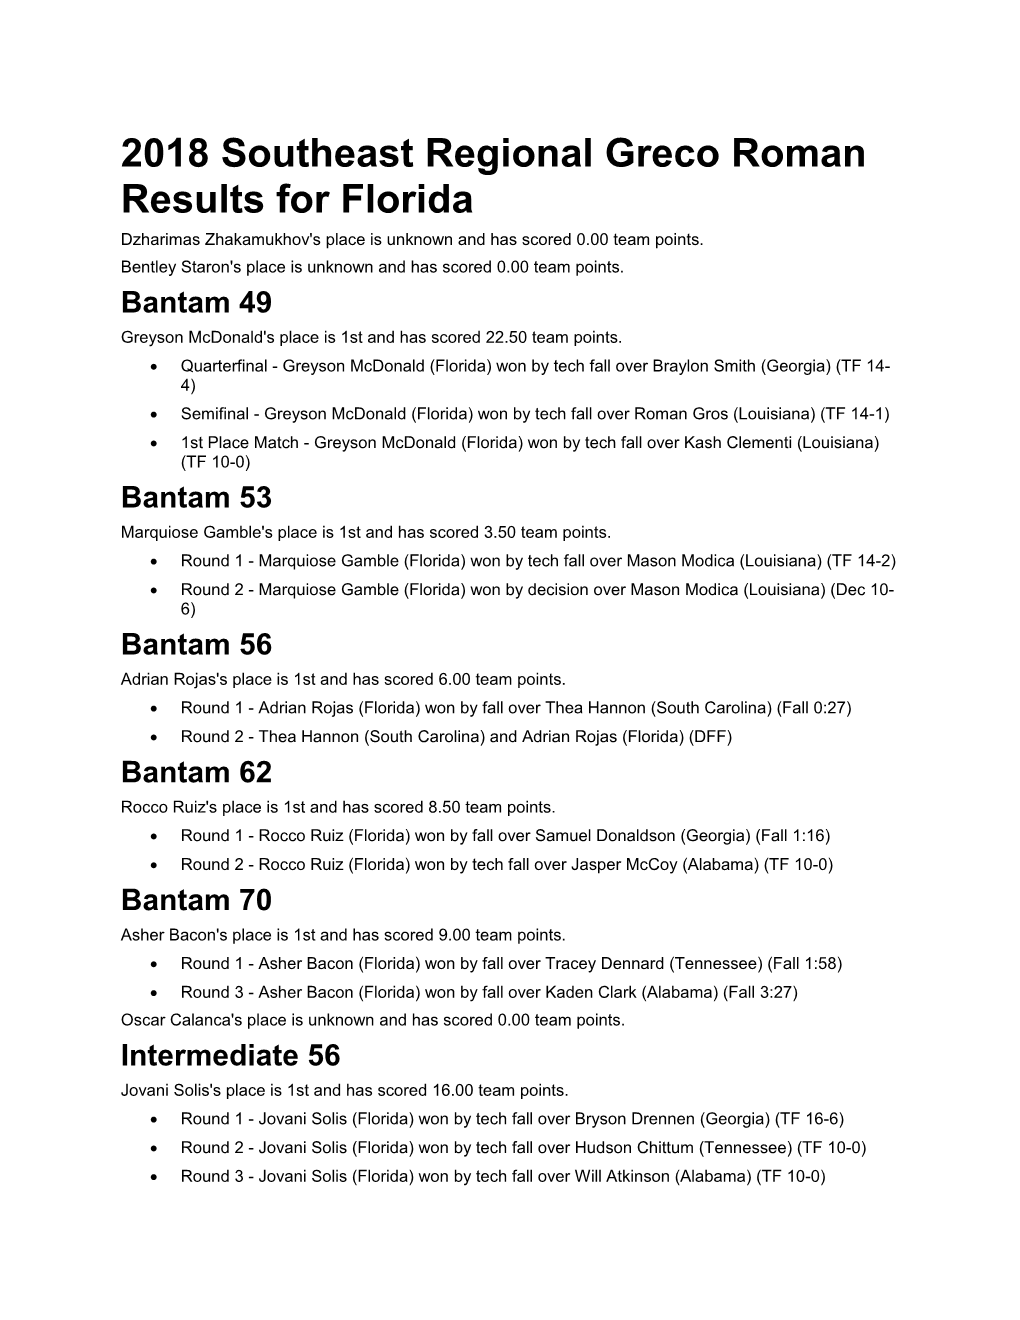 2018 Southeast Regional Greco Roman Results for Florida